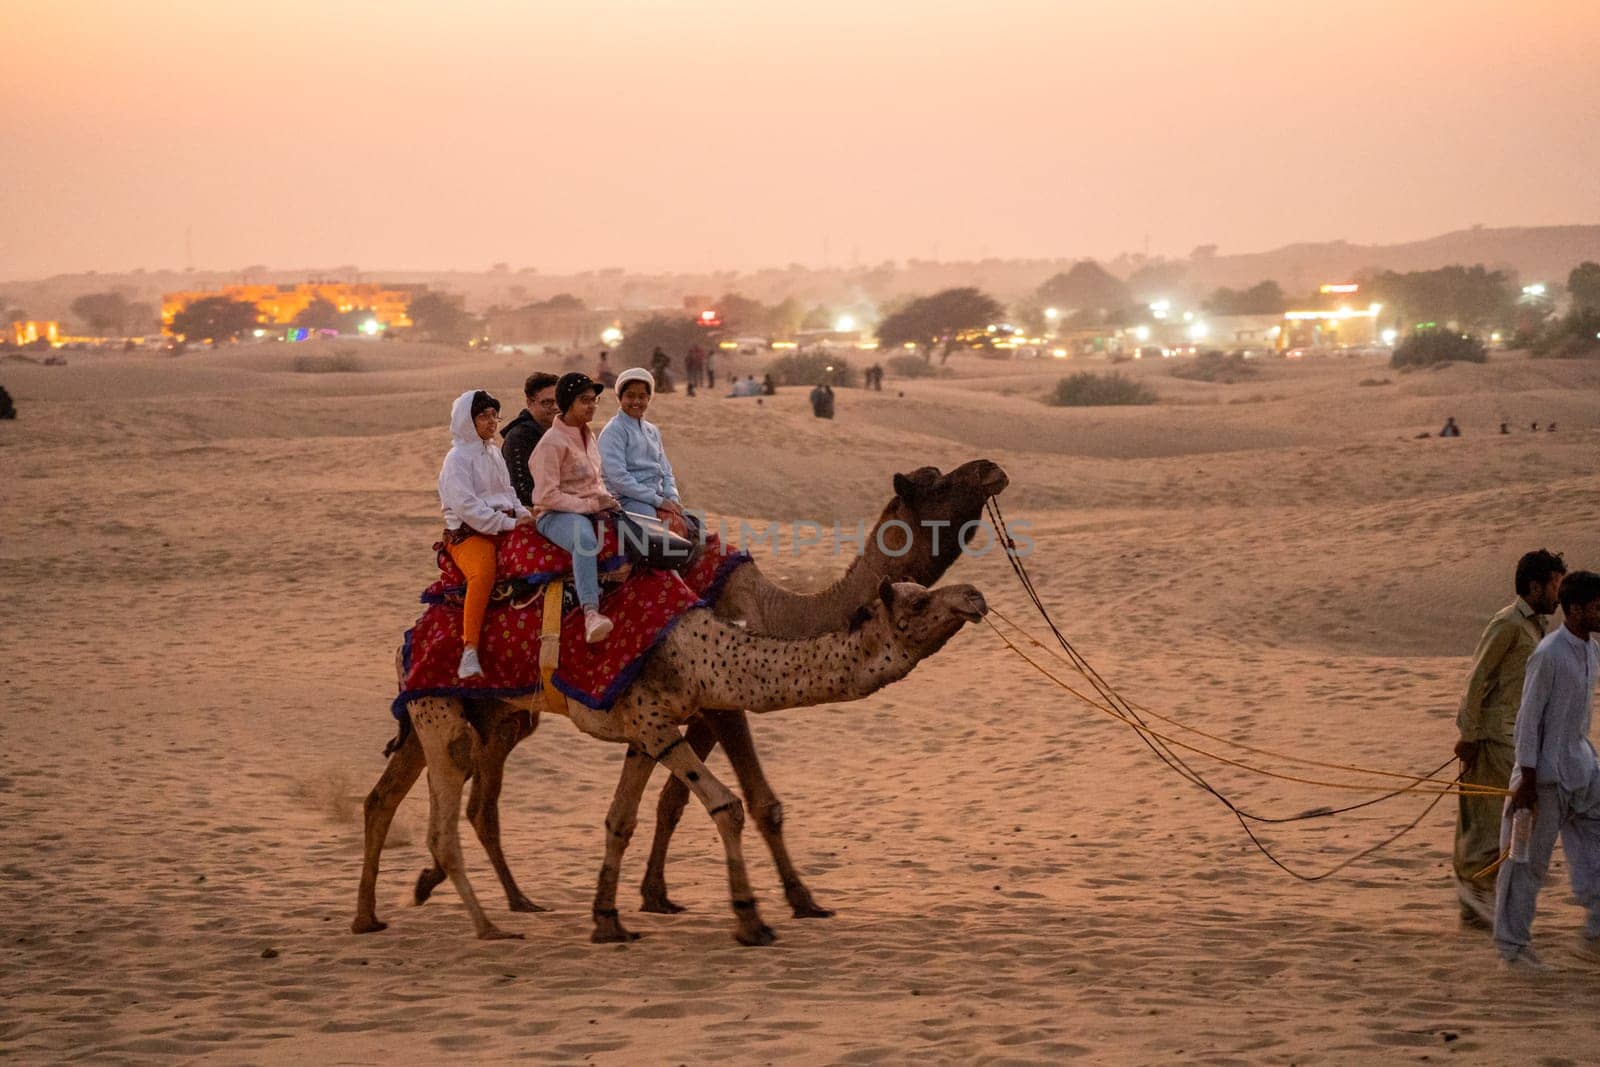 Jaisalmer, Rajasthan, India - 25th Dec 2023: Muslim man in traditional clothes leading camel with tourists across thar desert in Sam Jaisalmer Rajasthan at sunset showing this popular activity